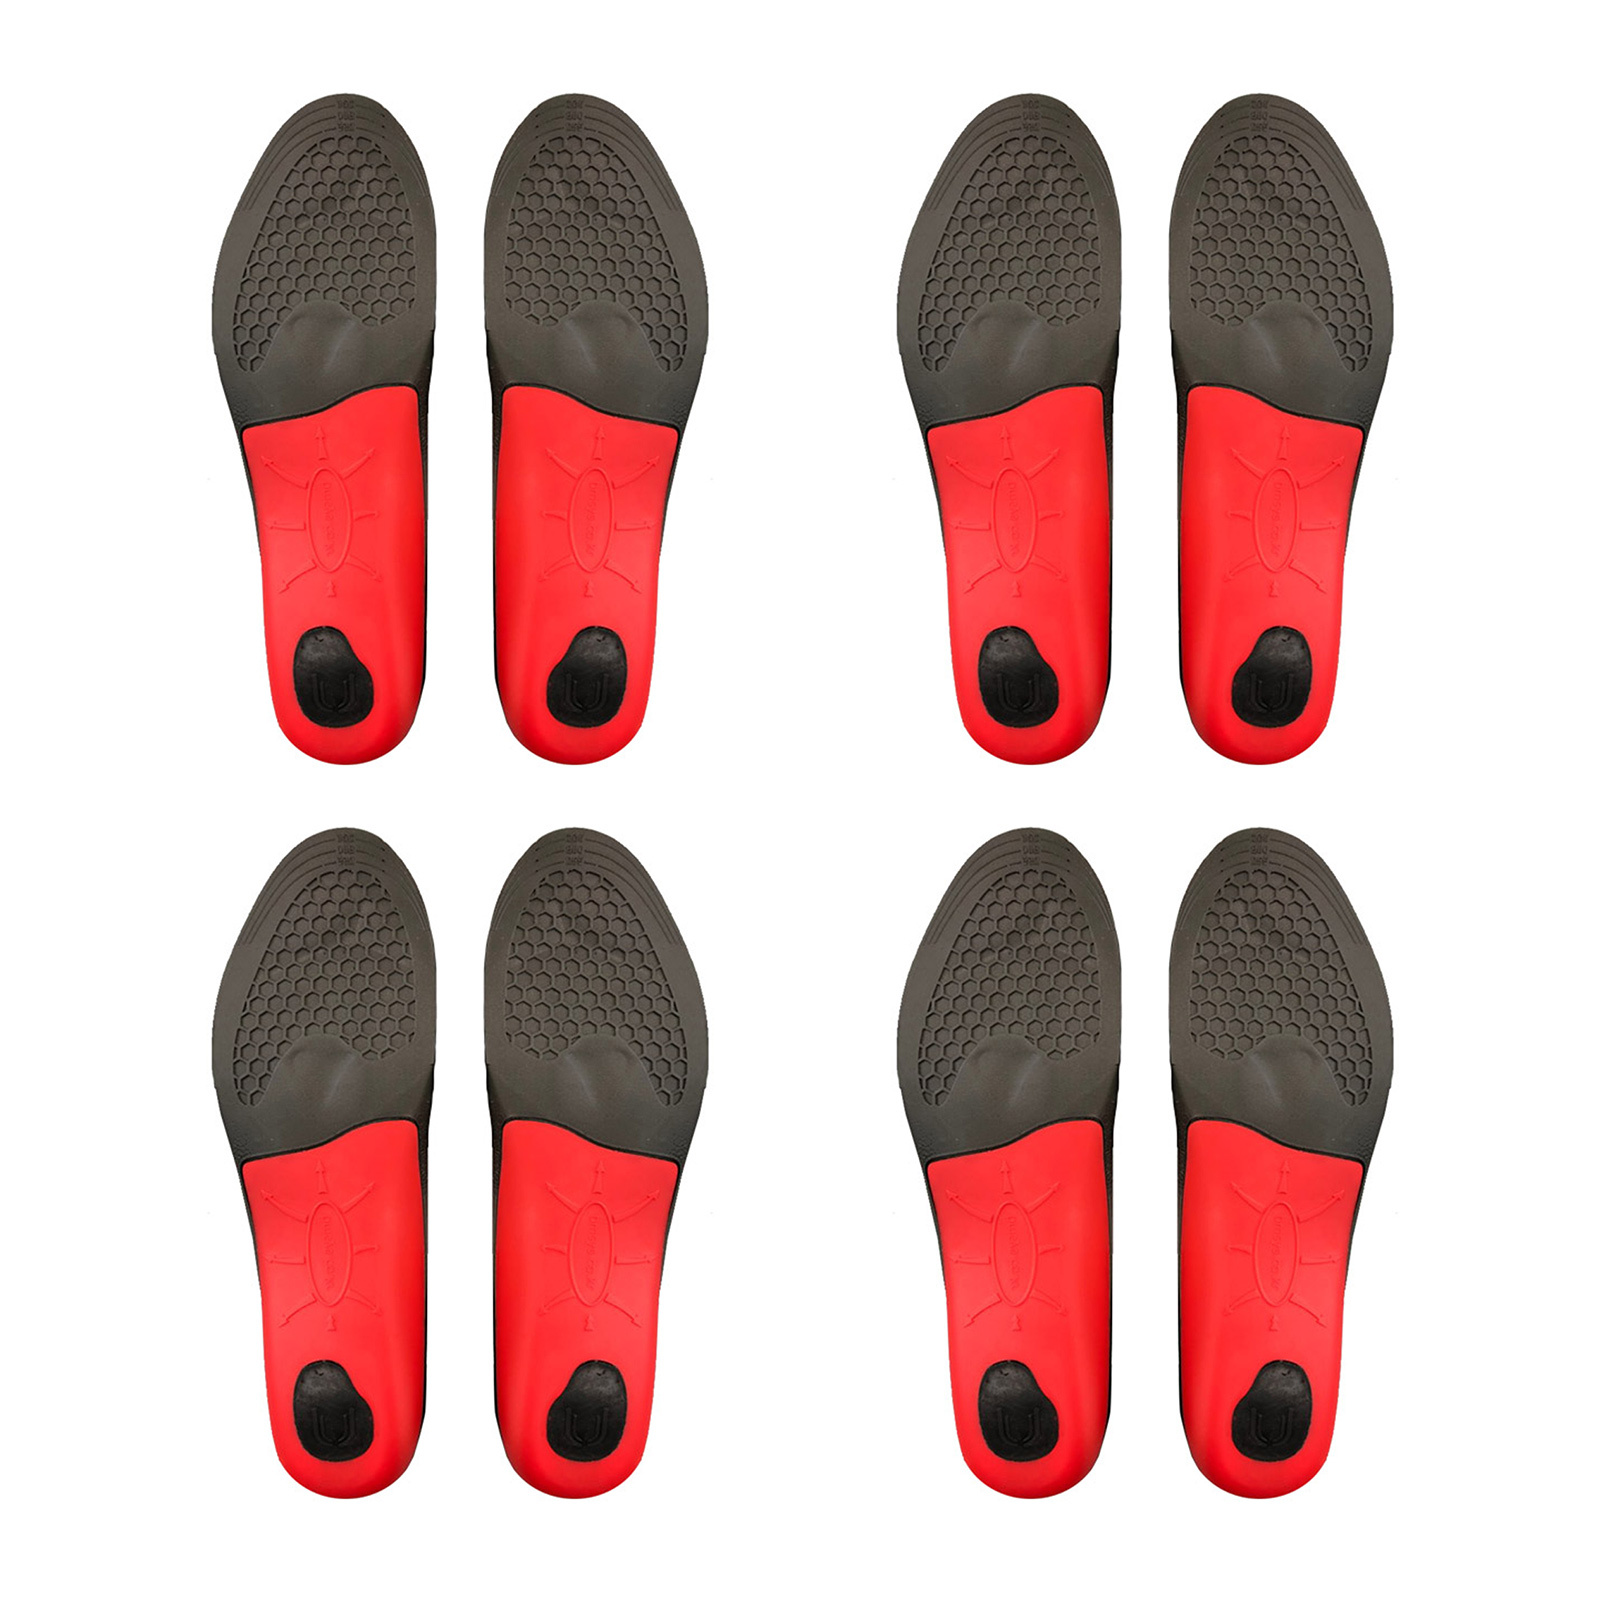 4X Pair Full Whole Shoe Insoles Arch Support Medium